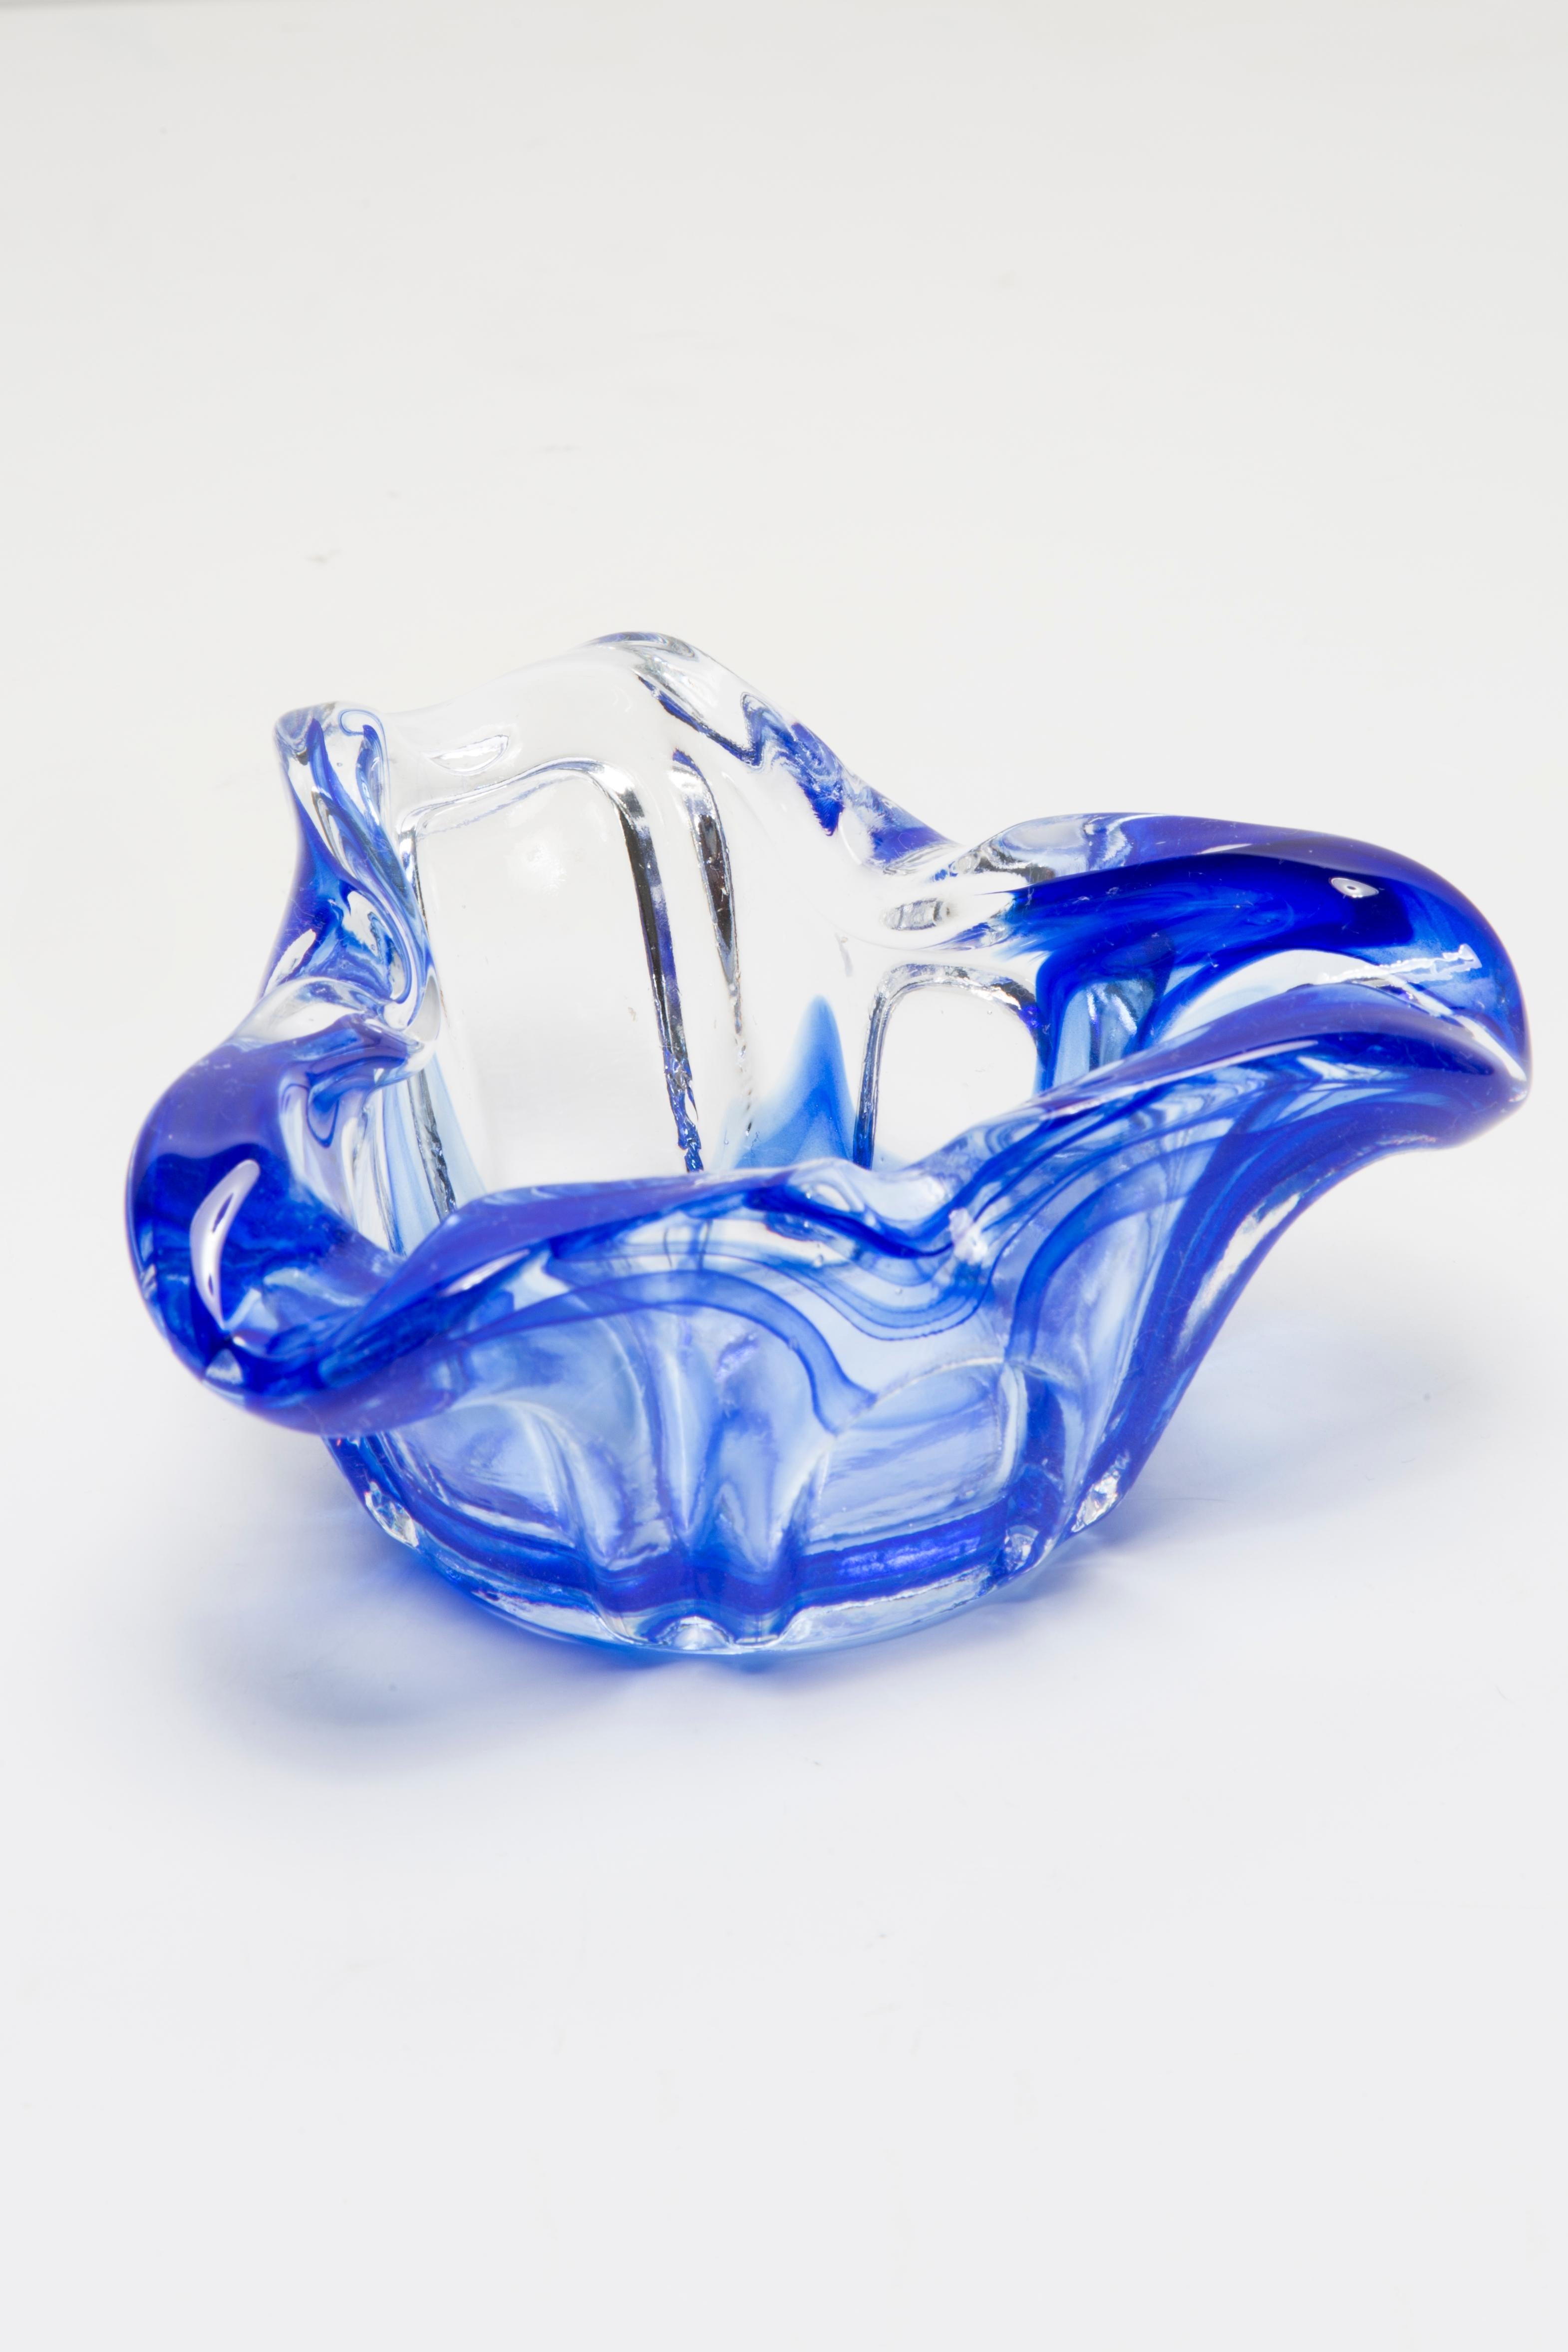 20th Century Mid Century Crystal Blue Artistic Glass Ashtray Bowl, Italy, 1970s For Sale